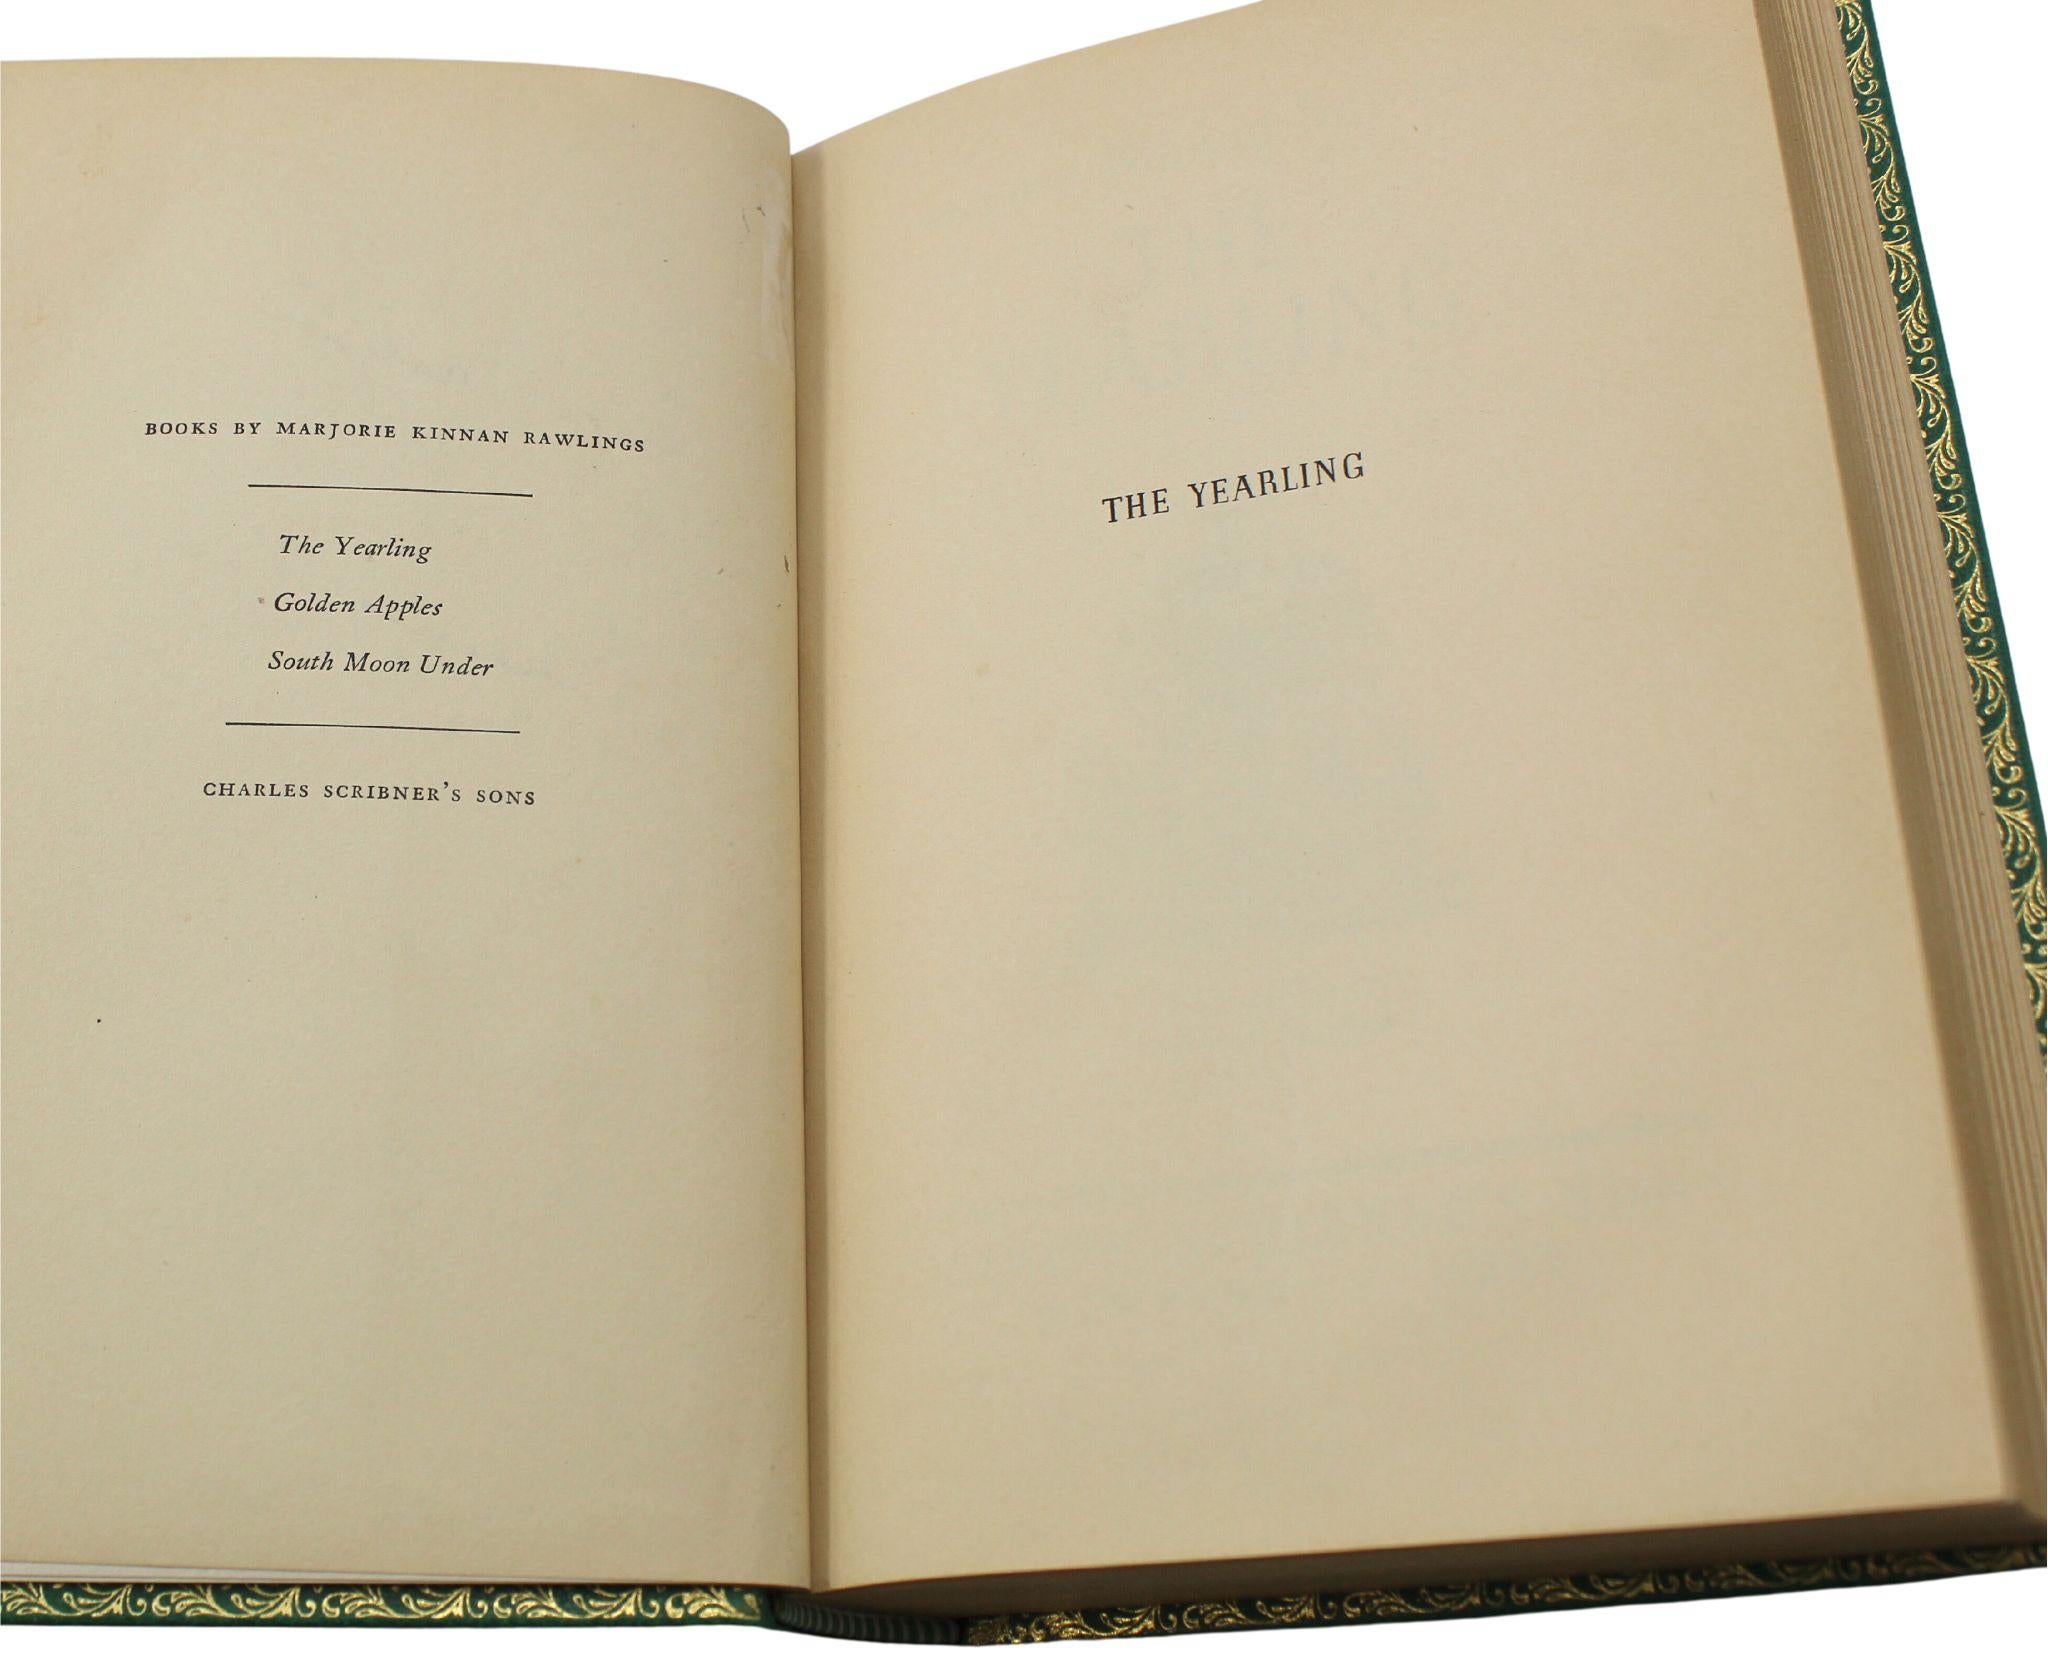 Gilt The Yearling by Marjorie Kinnan Rawlings, First Edition, 1938 For Sale